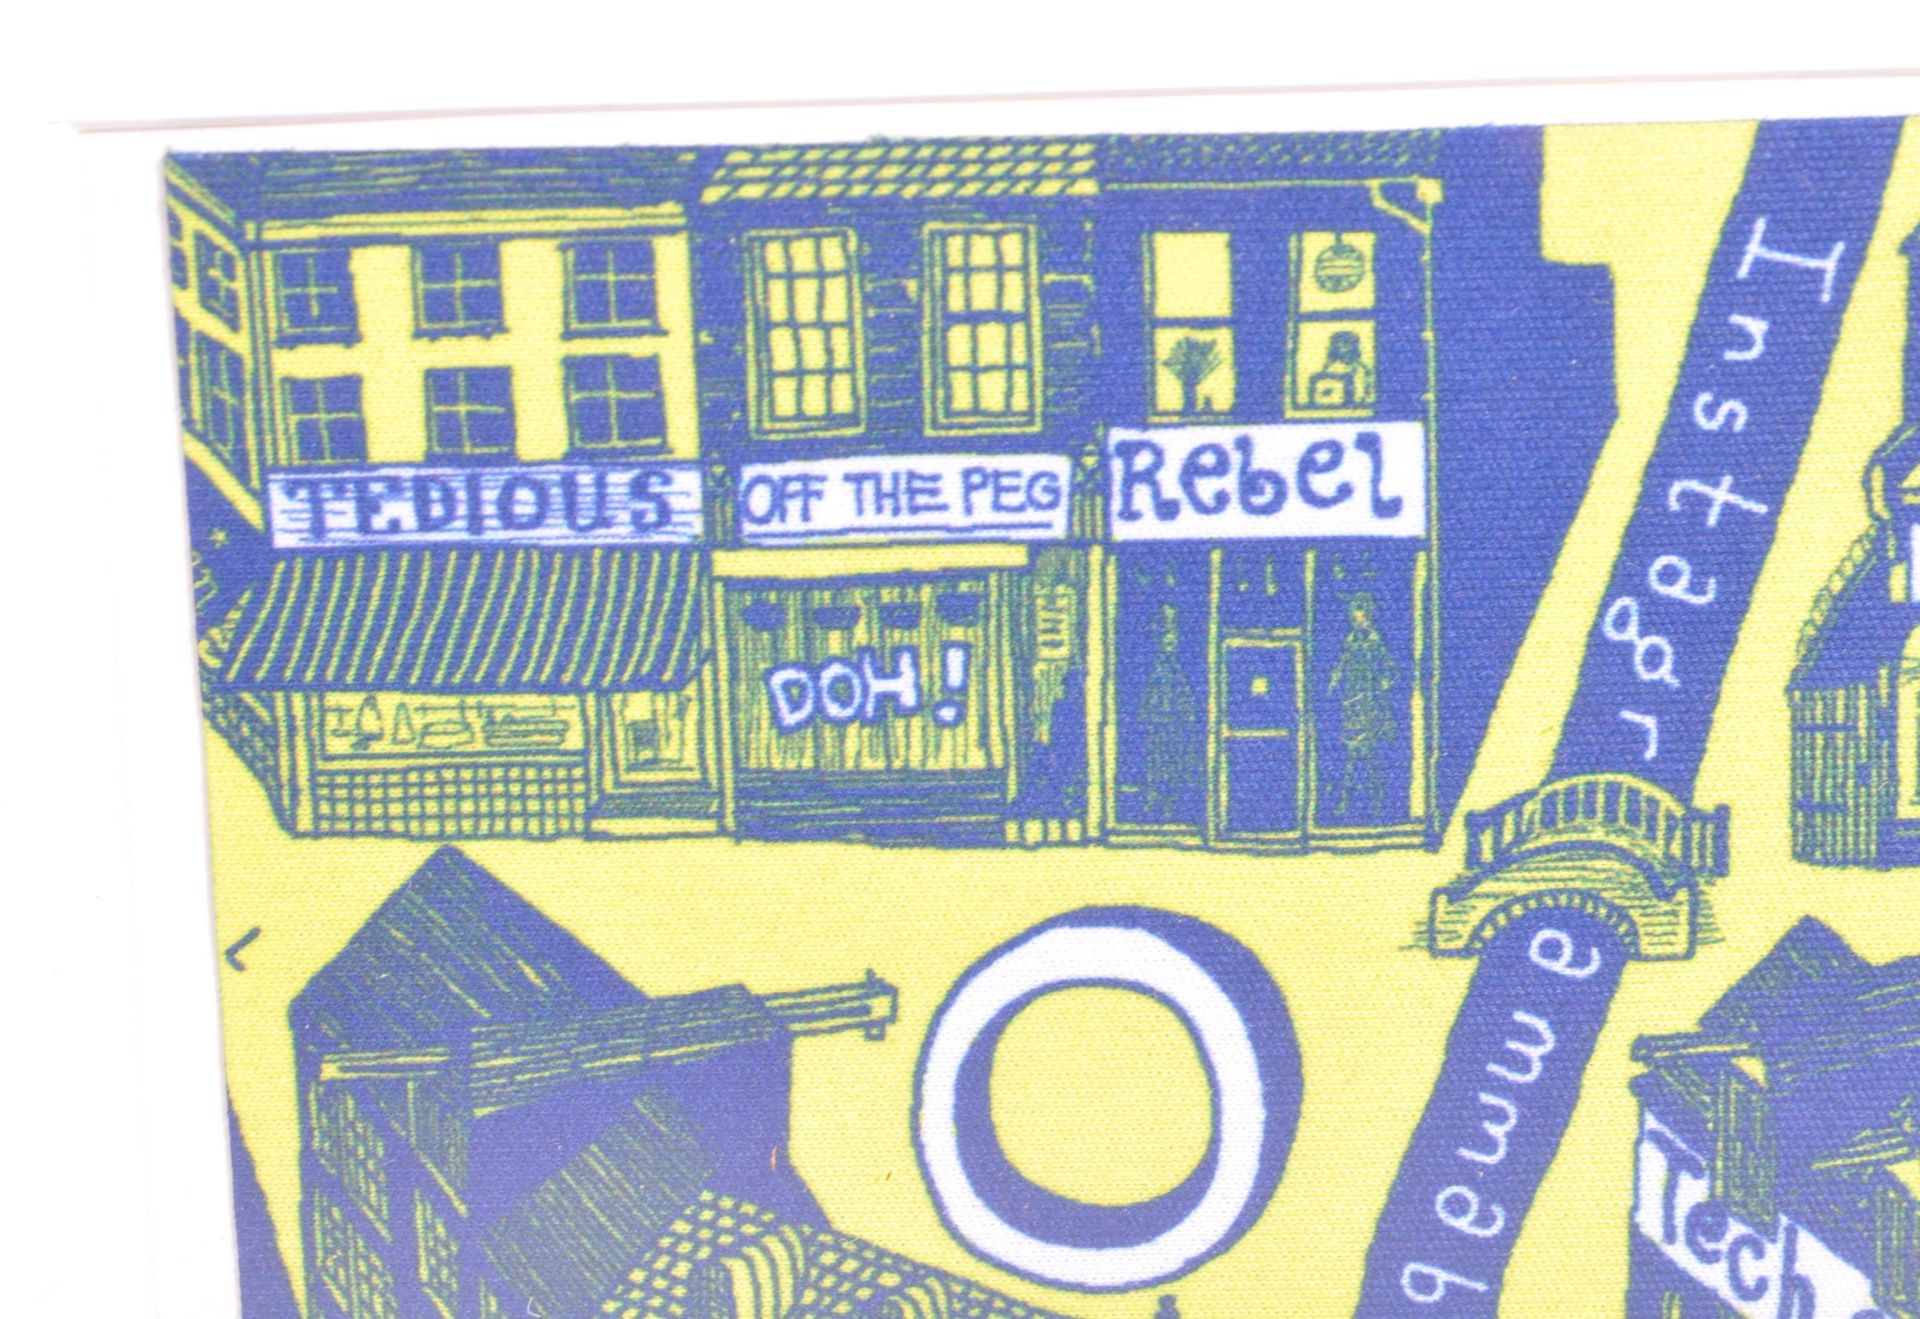 CONTEMPORARY GENTRIFICATION FRAMED GRAYSON PERRY PRINT - Image 3 of 4